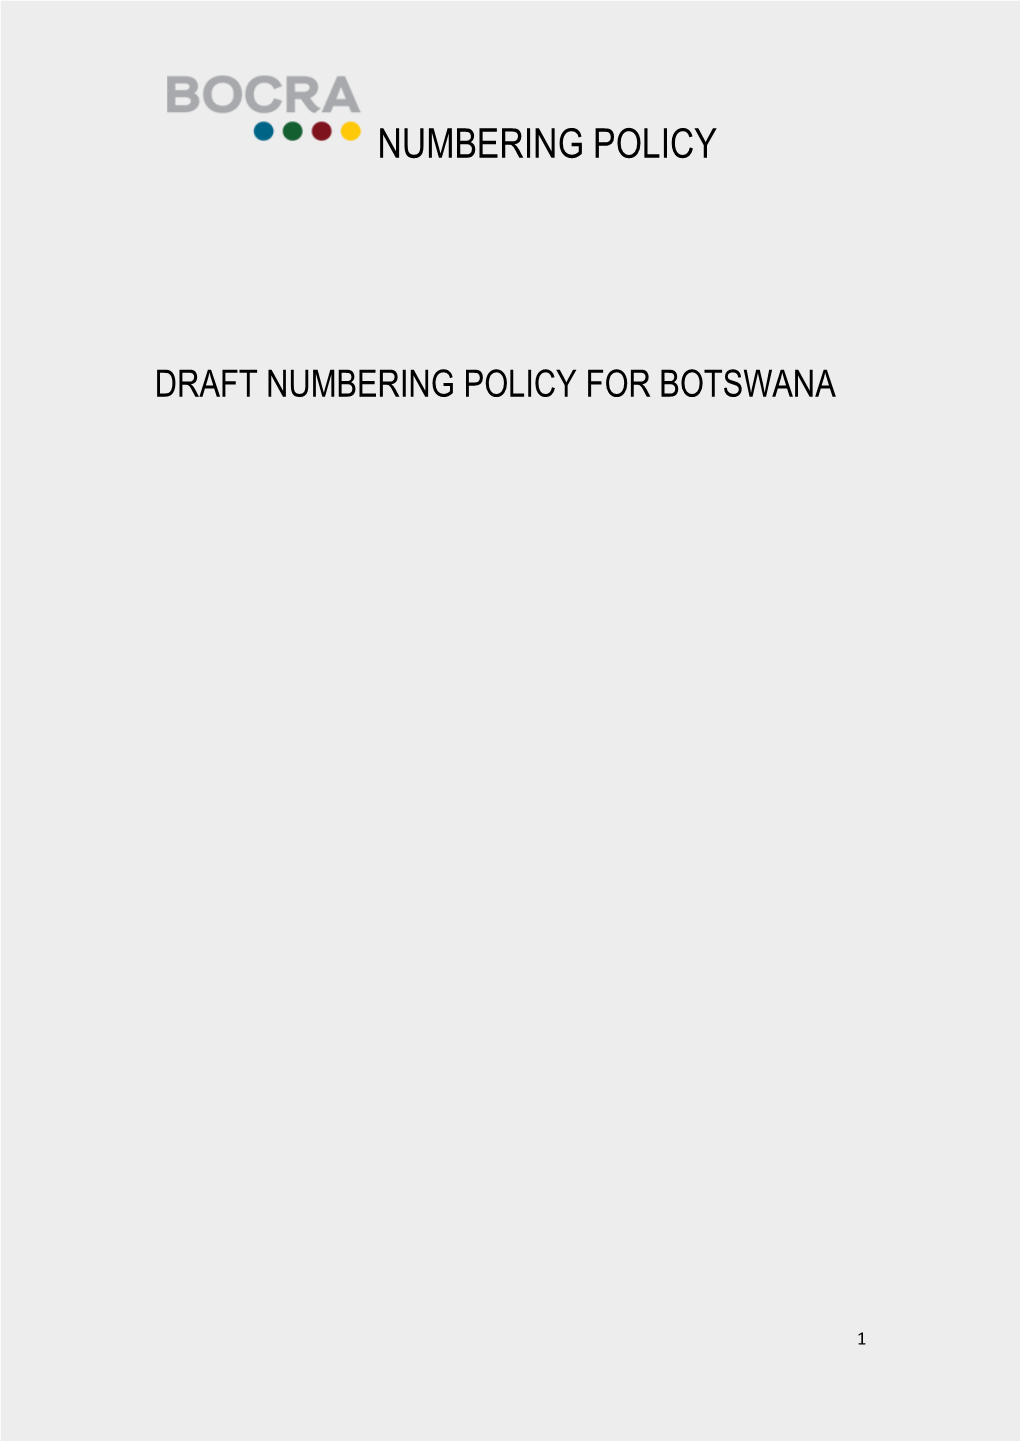 Draft Numbering Policy for Botswana